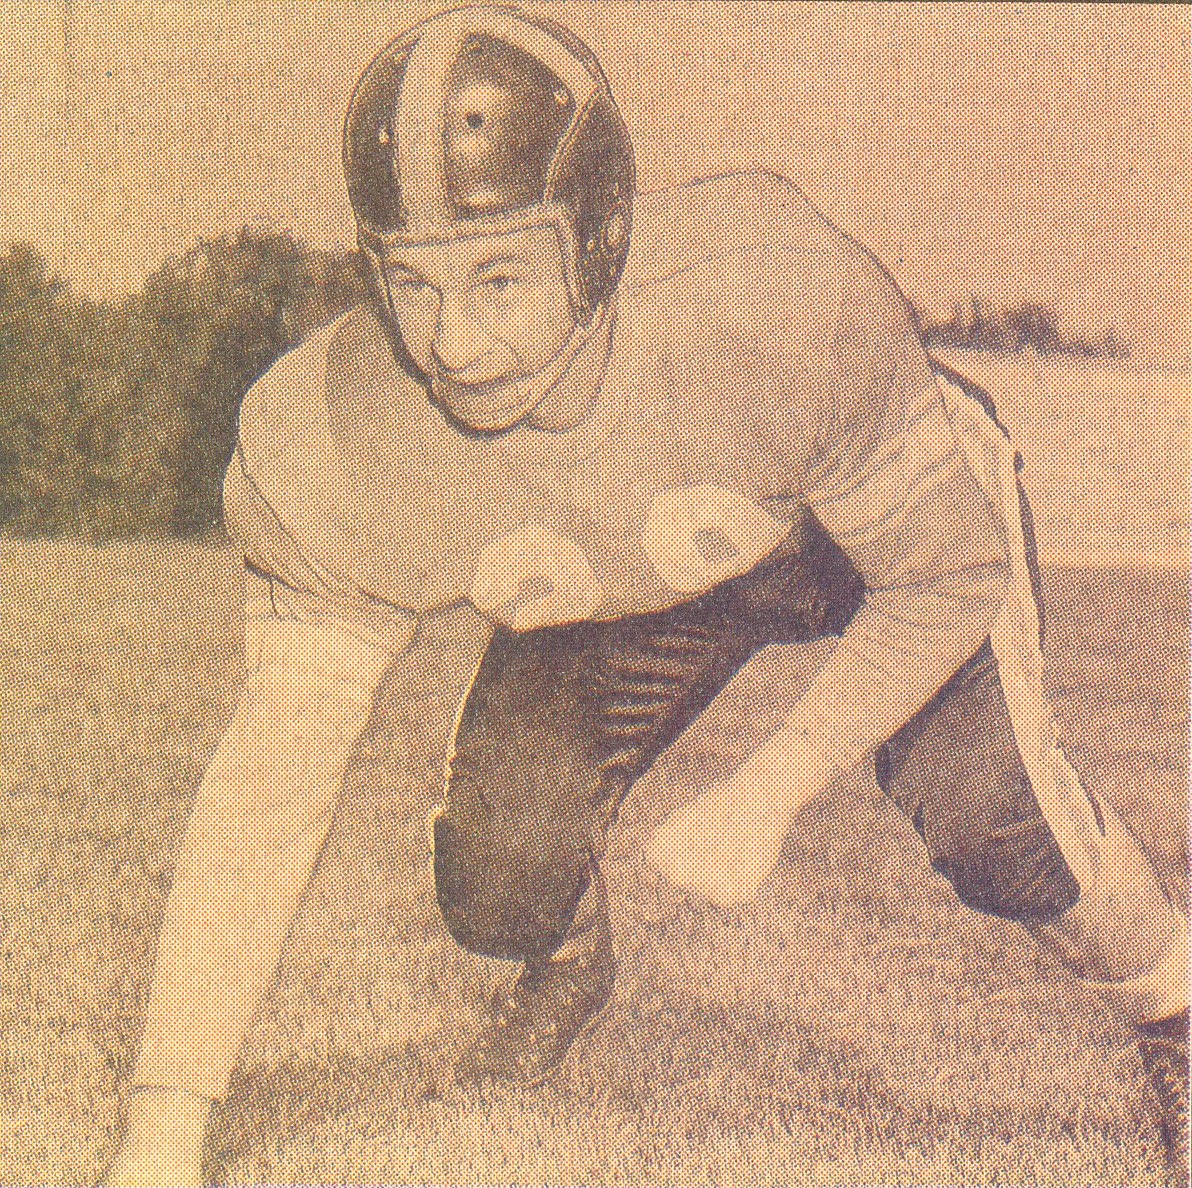 A three-sport letterwinner at Crete High School, Papik eventually attended Doane where he earned All-Conference honors twice during his Doane football playing career, and voted captain his senior year. 